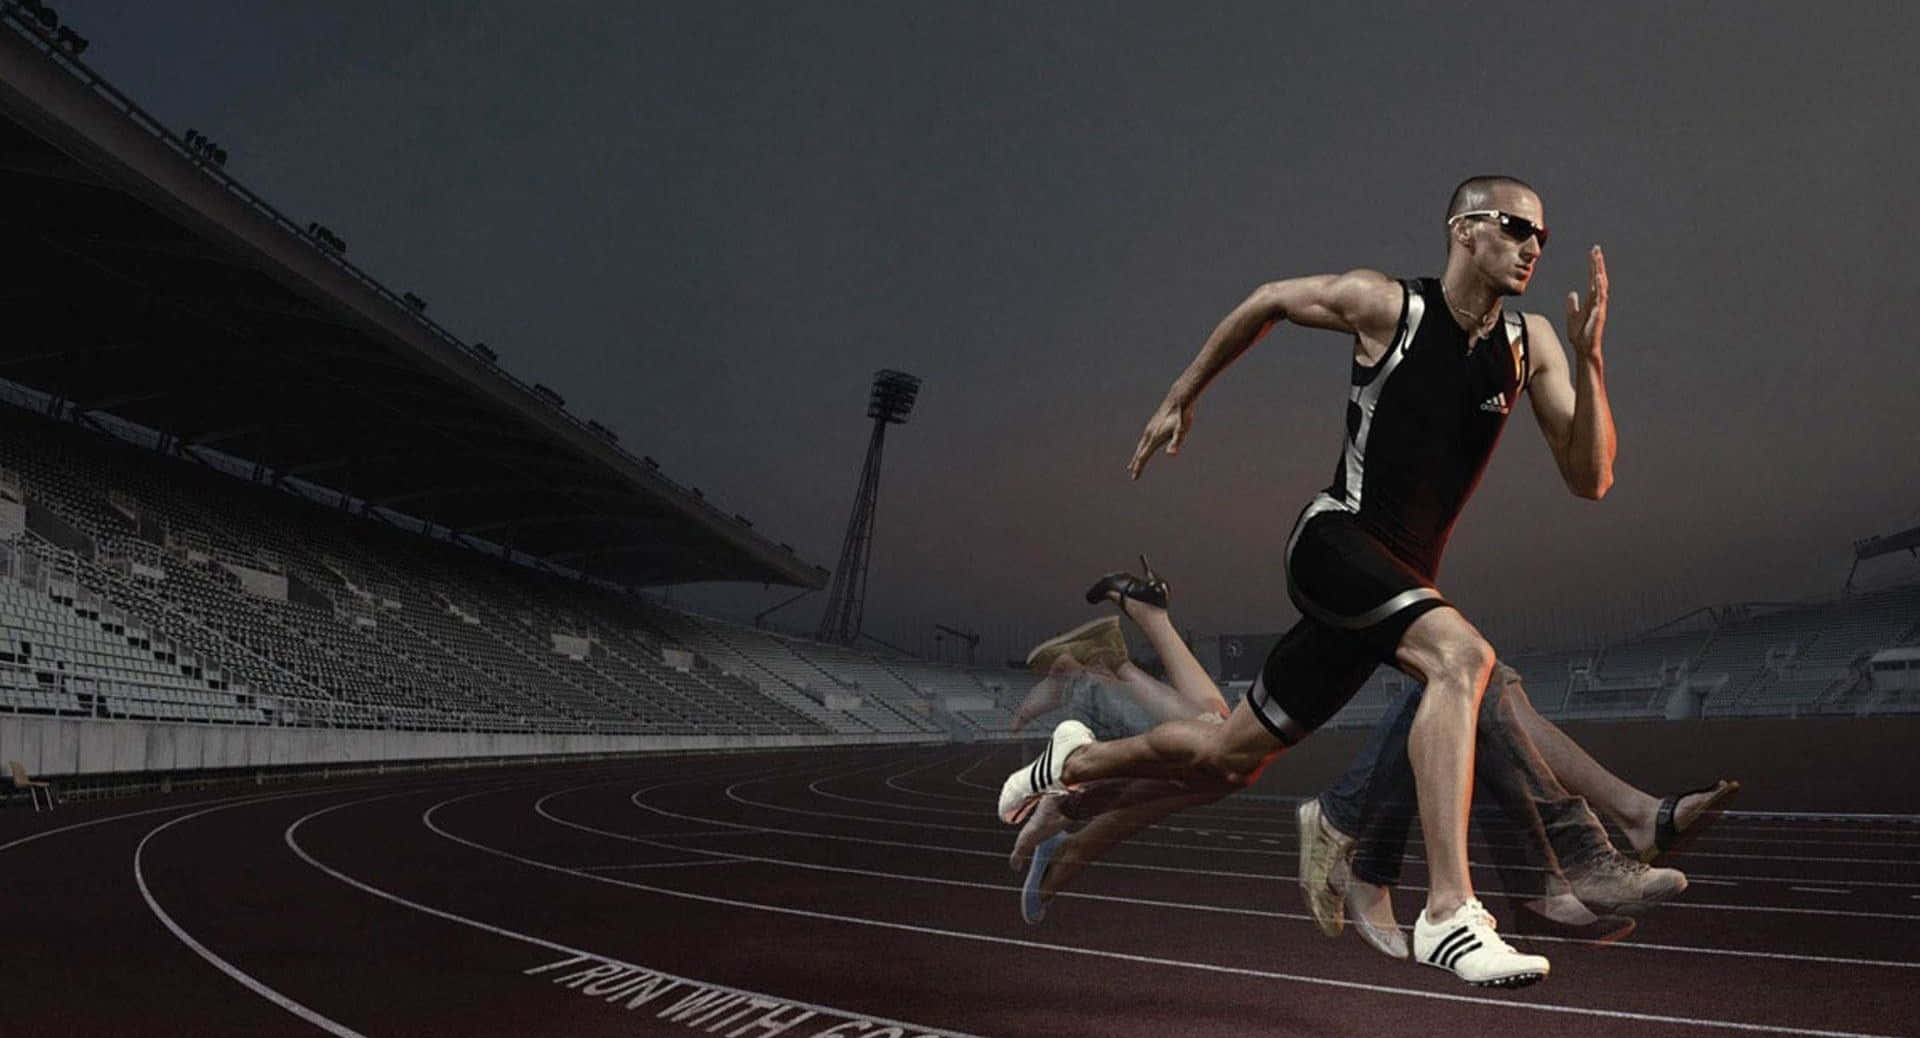 A Man Running On A Track At Night